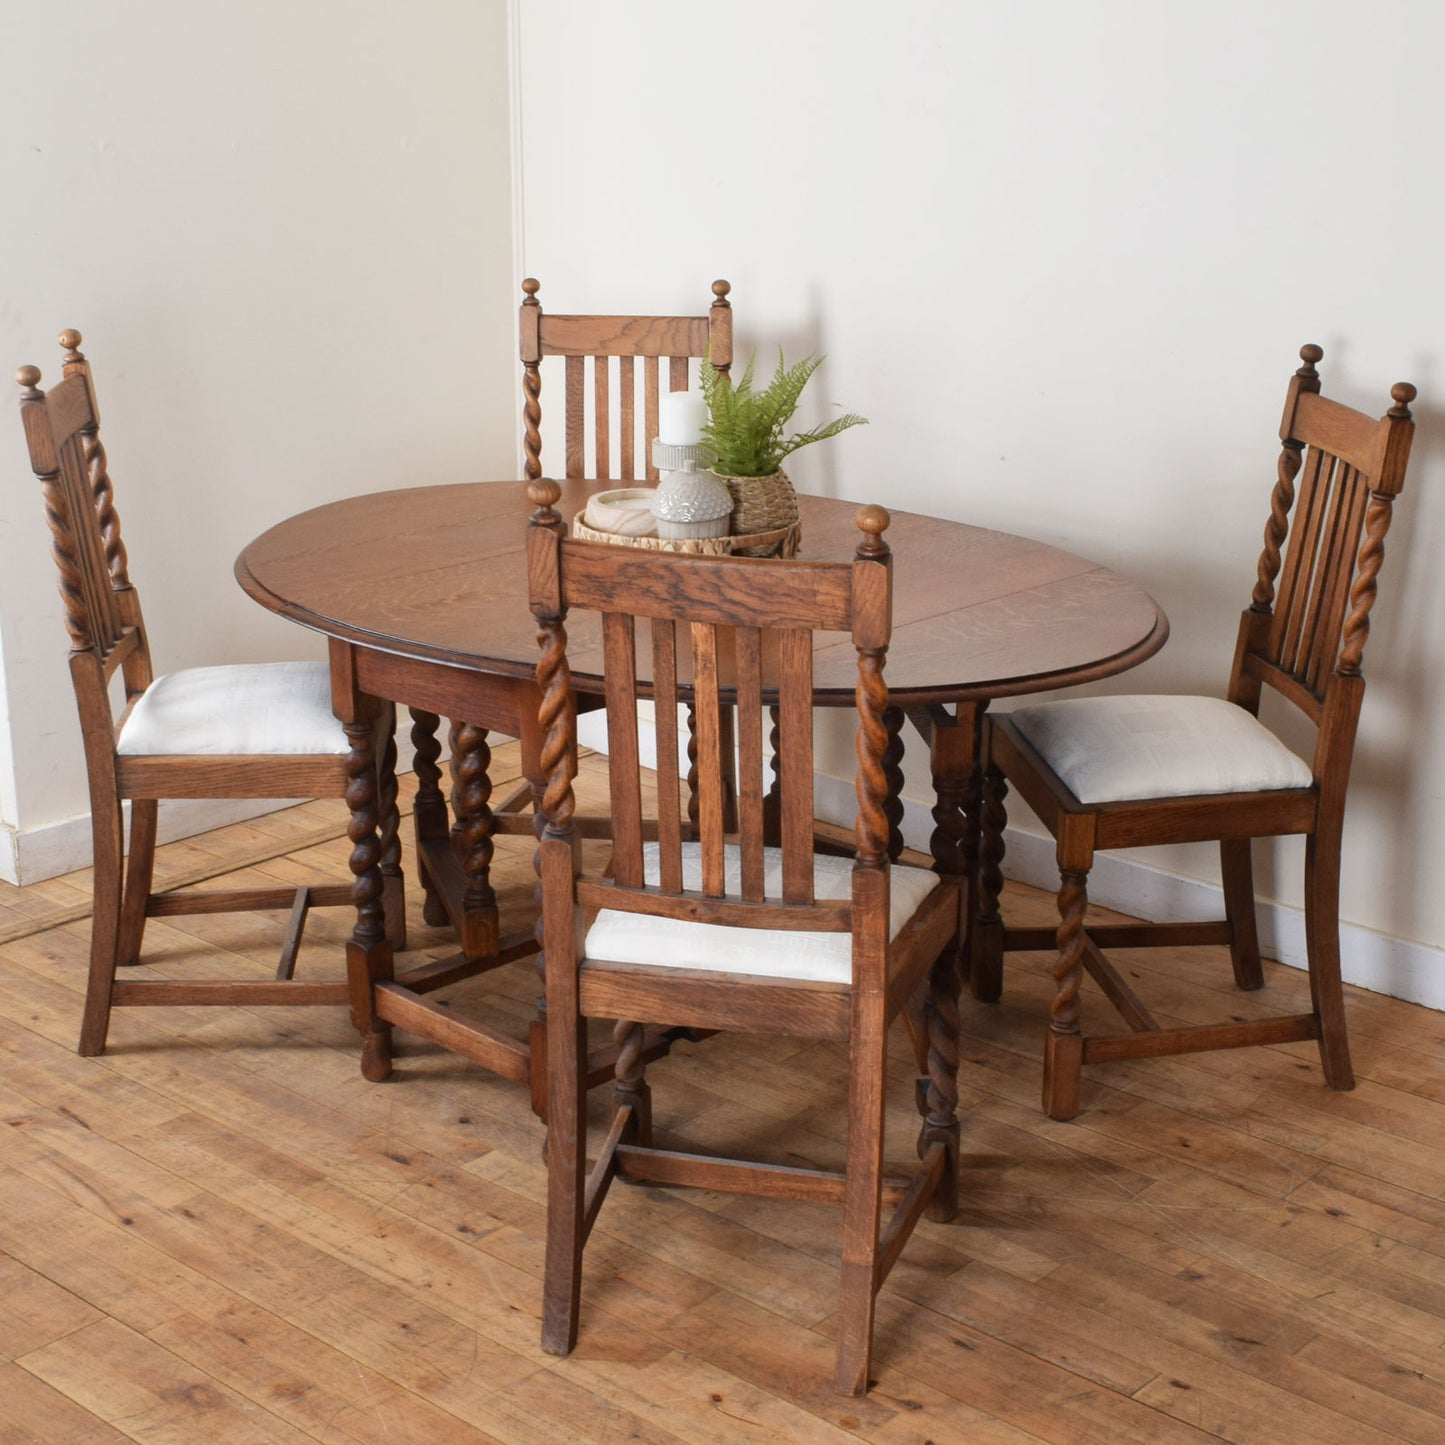 Barley-Twist Drop Leaf Table and Four Chairs